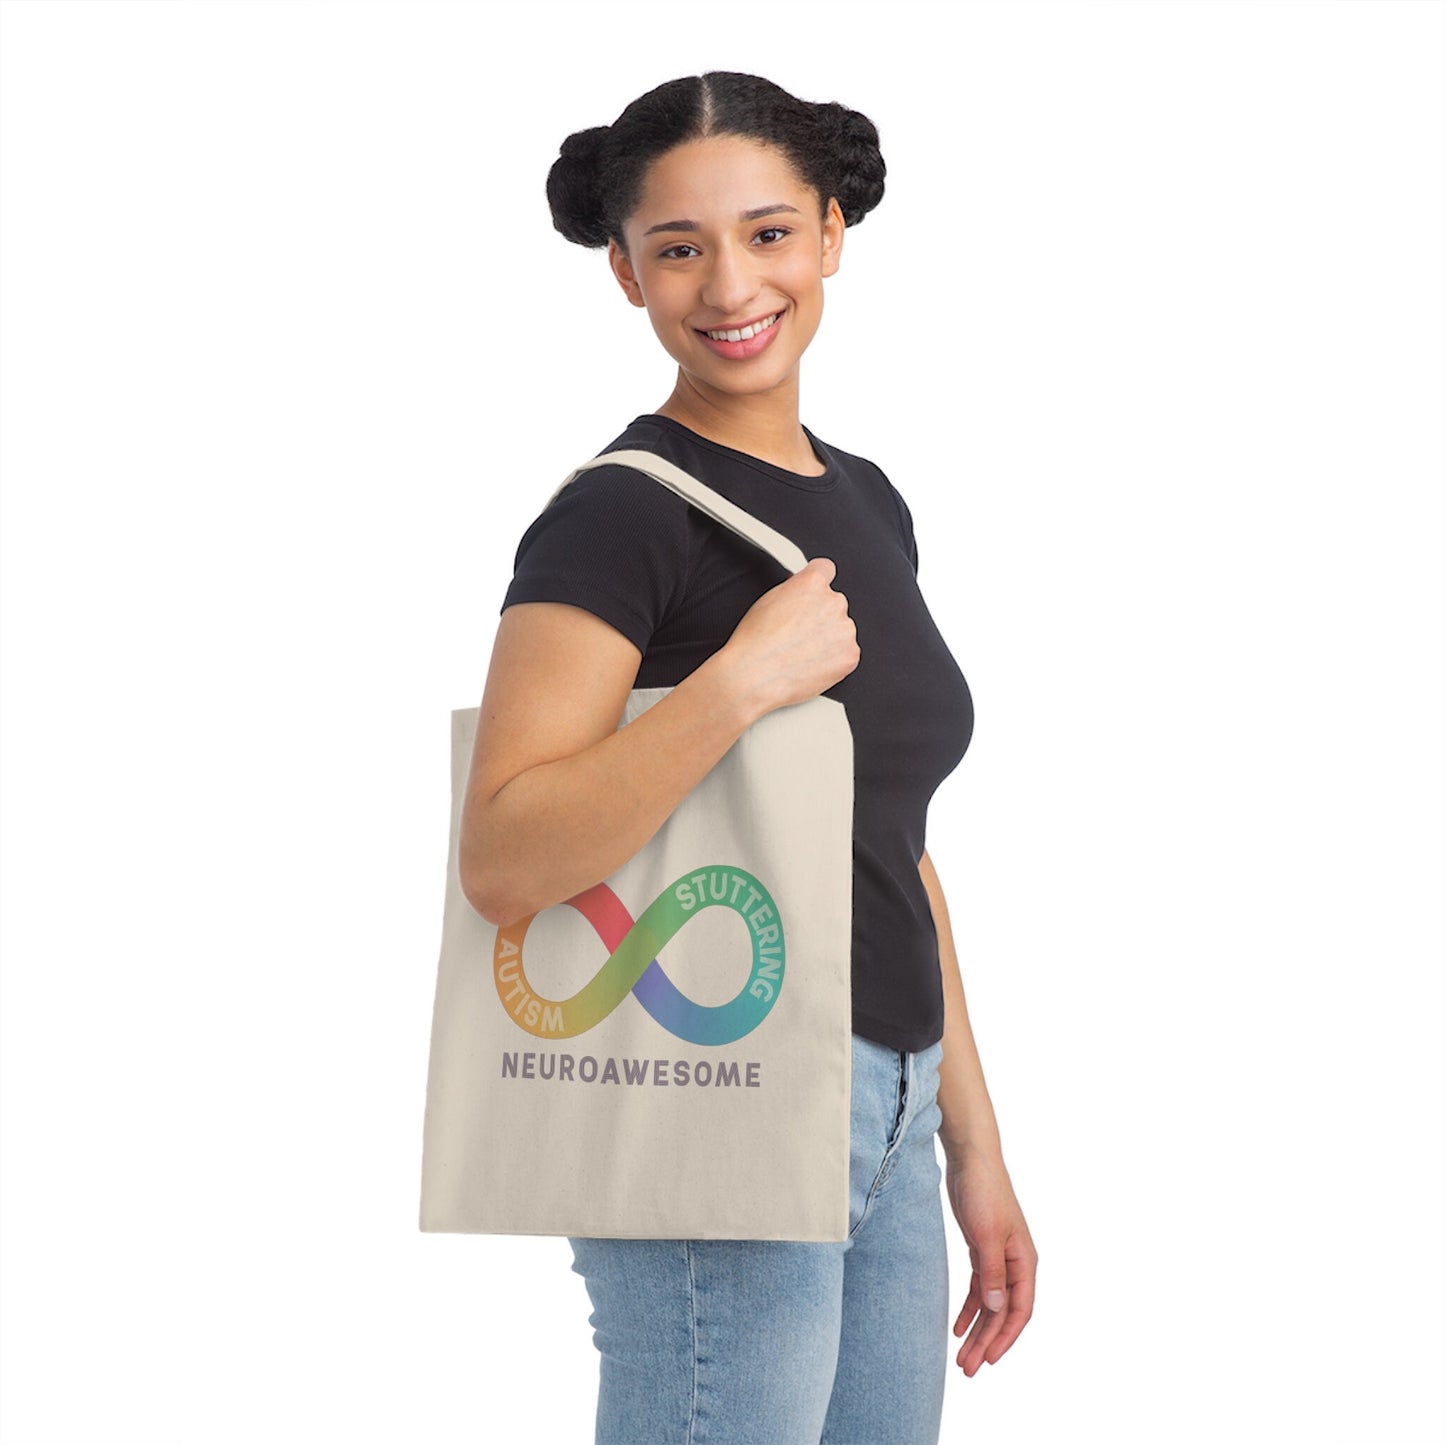 Neuroawesome Stuttering Autism Infinity Tote